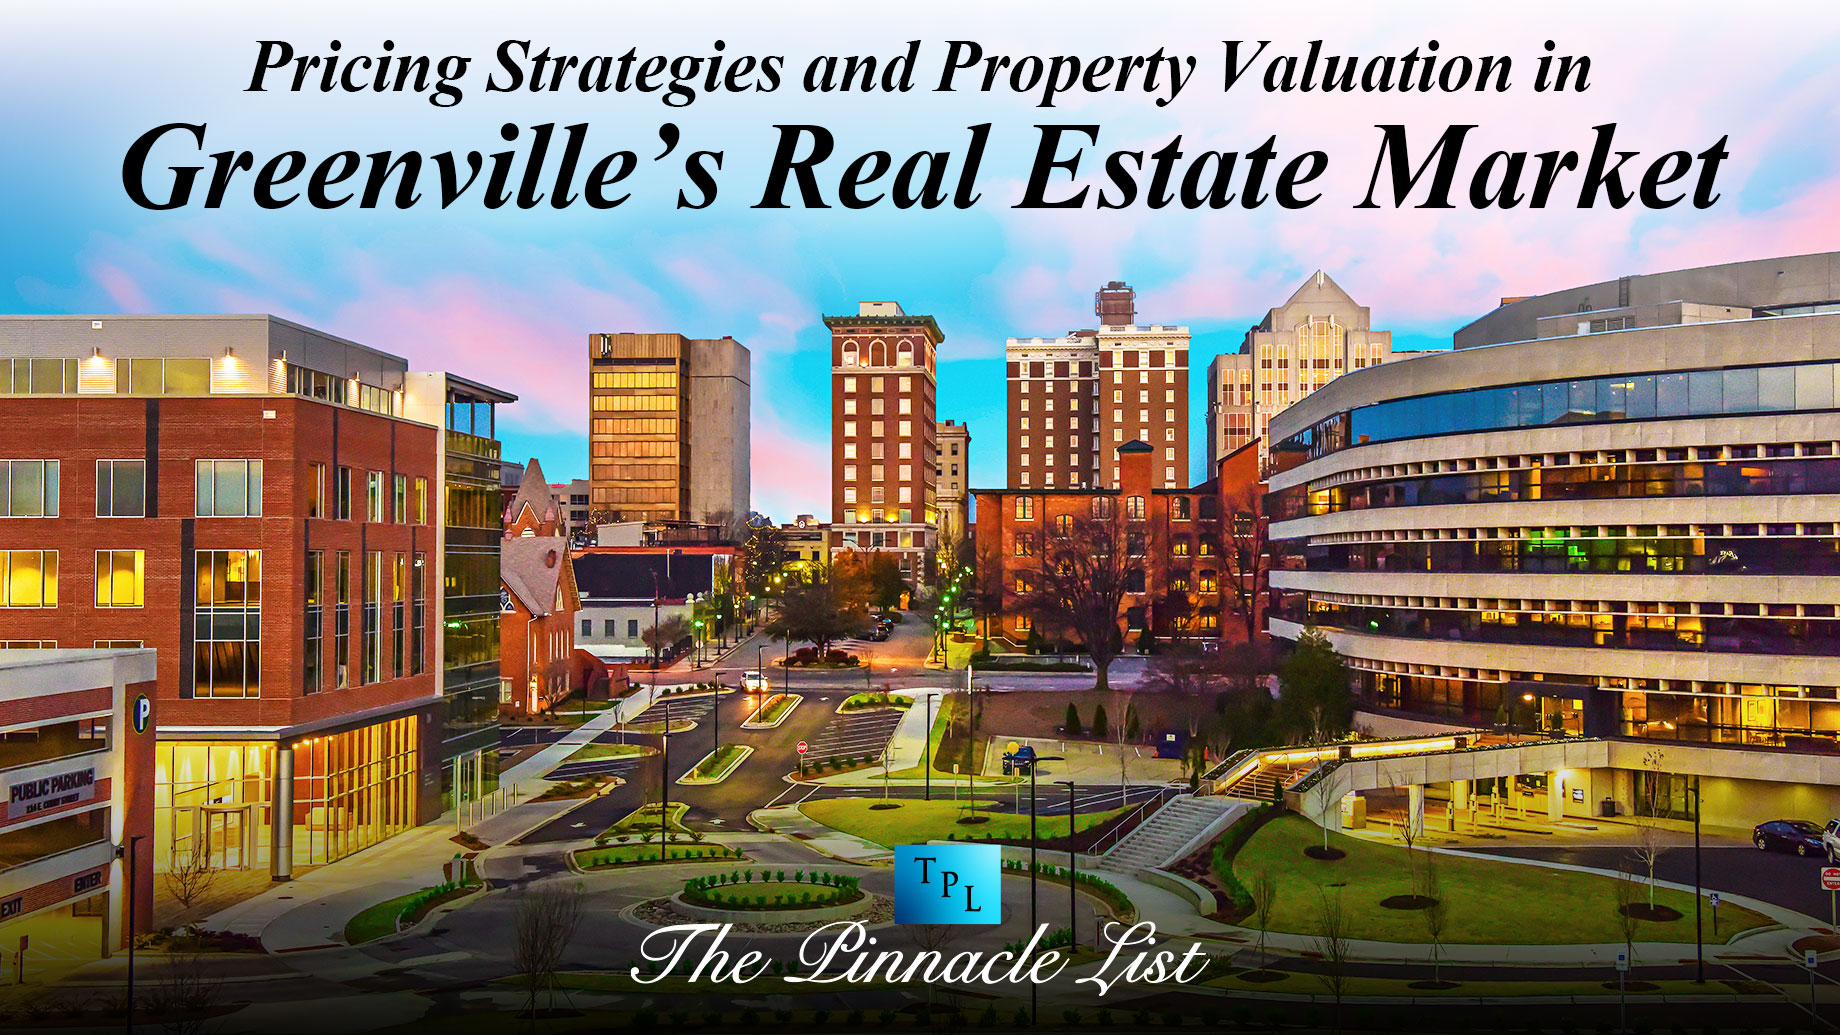 Pricing Strategies and Property Valuation in Greenville's Real Estate Market